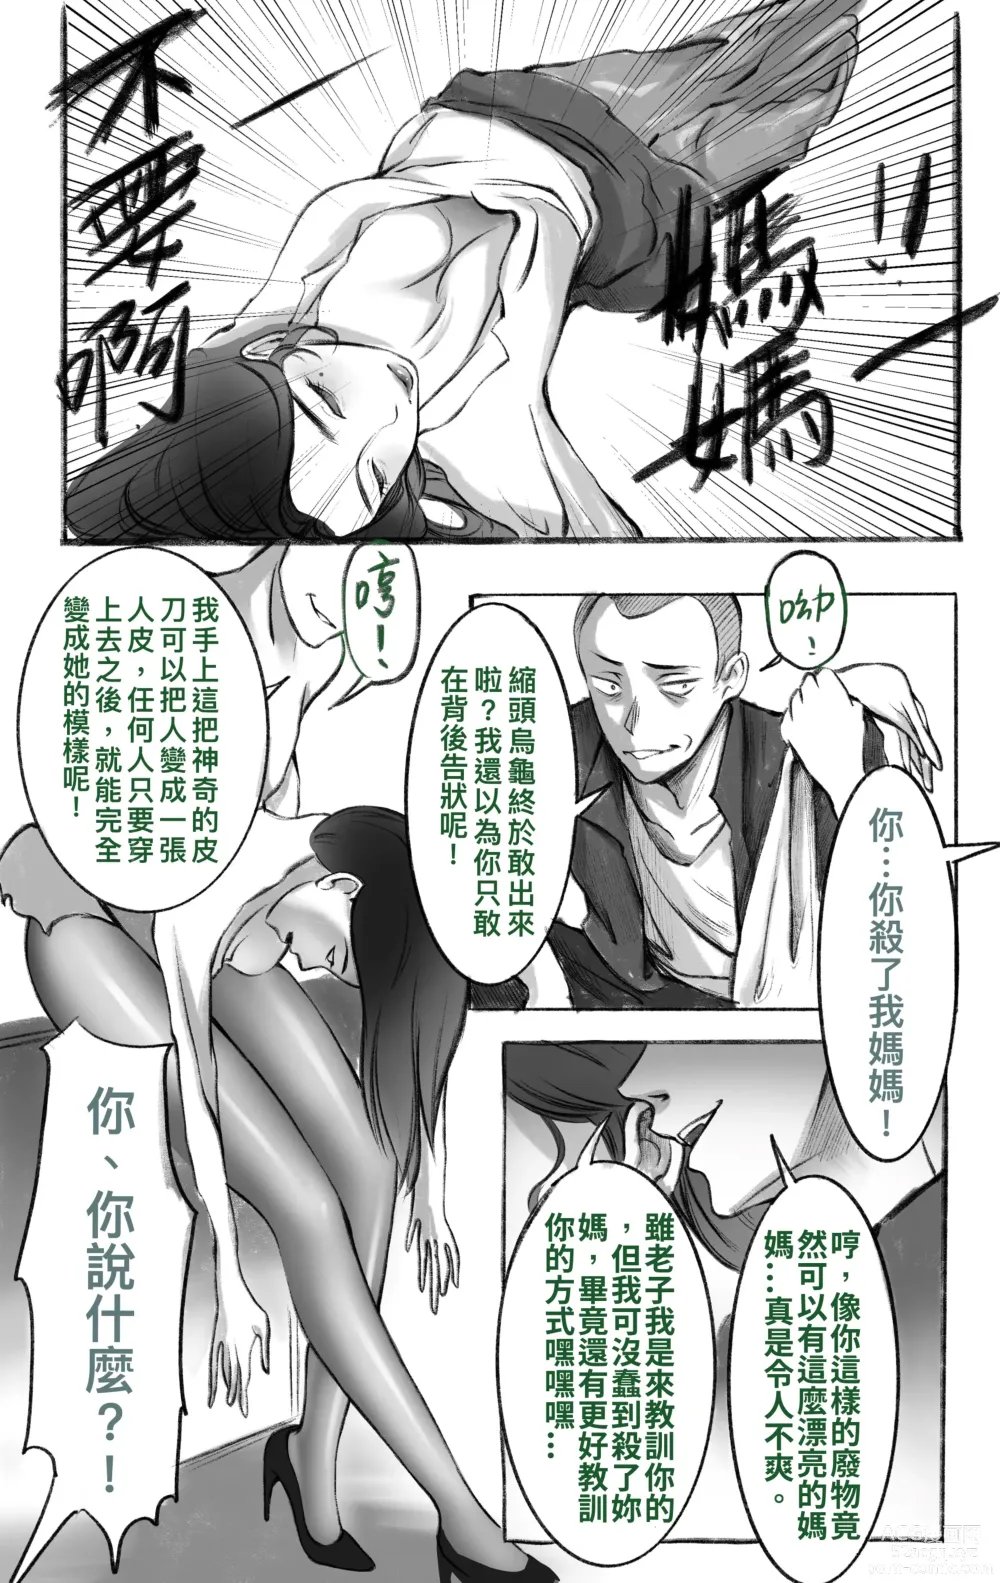 Page 2 of doujinshi 母愛之下